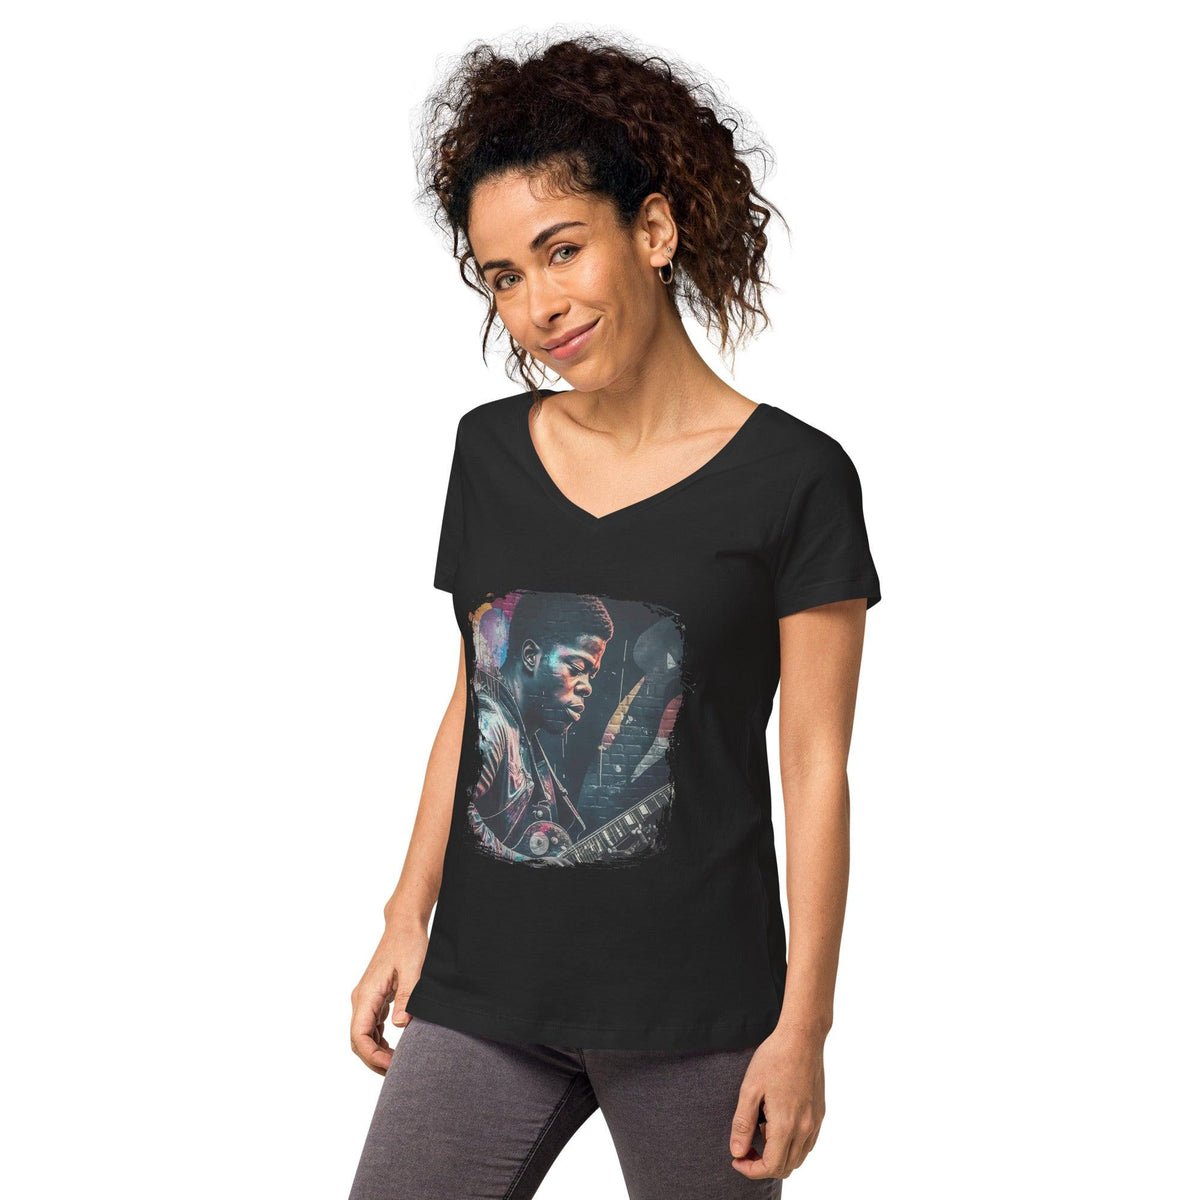 Fingers On Fire, Strings Ablaze Women’s Fitted V-neck T-shirt - Beyond T-shirts